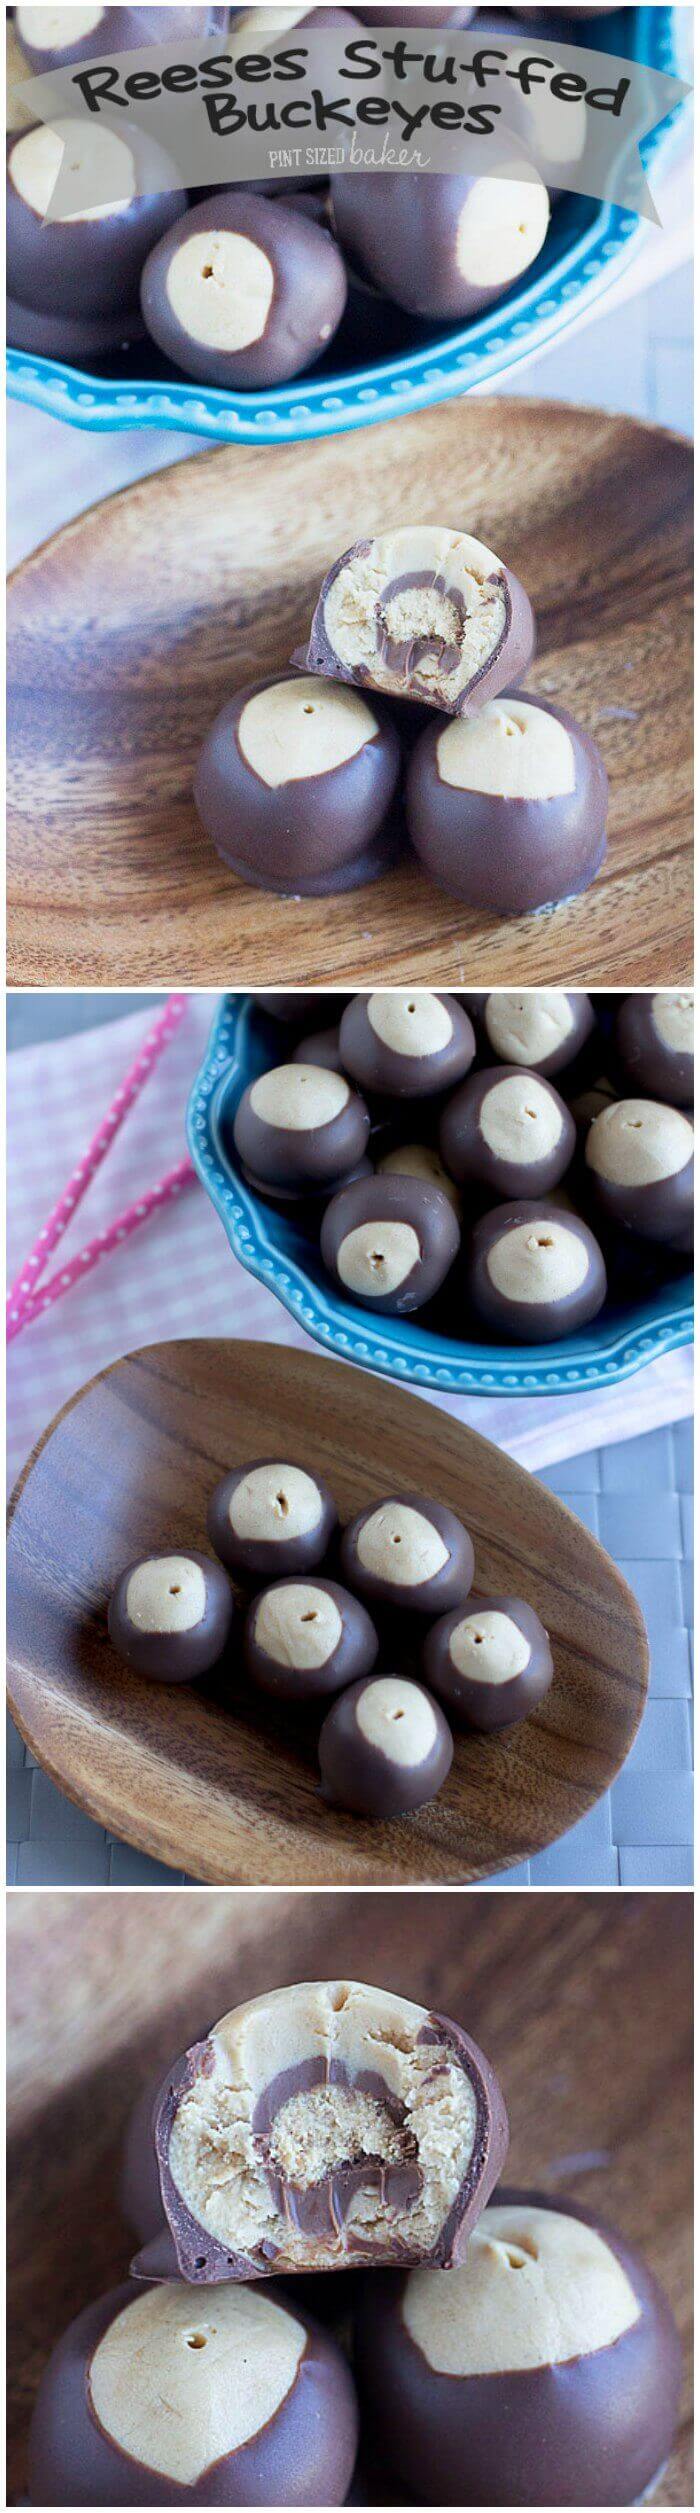 Everyone will flip for these Reese's Stuffed Buckeye Candies. Peanut Butter candy stuffed with a peanut butter candy and then dipped in chocolate. They are so good!!